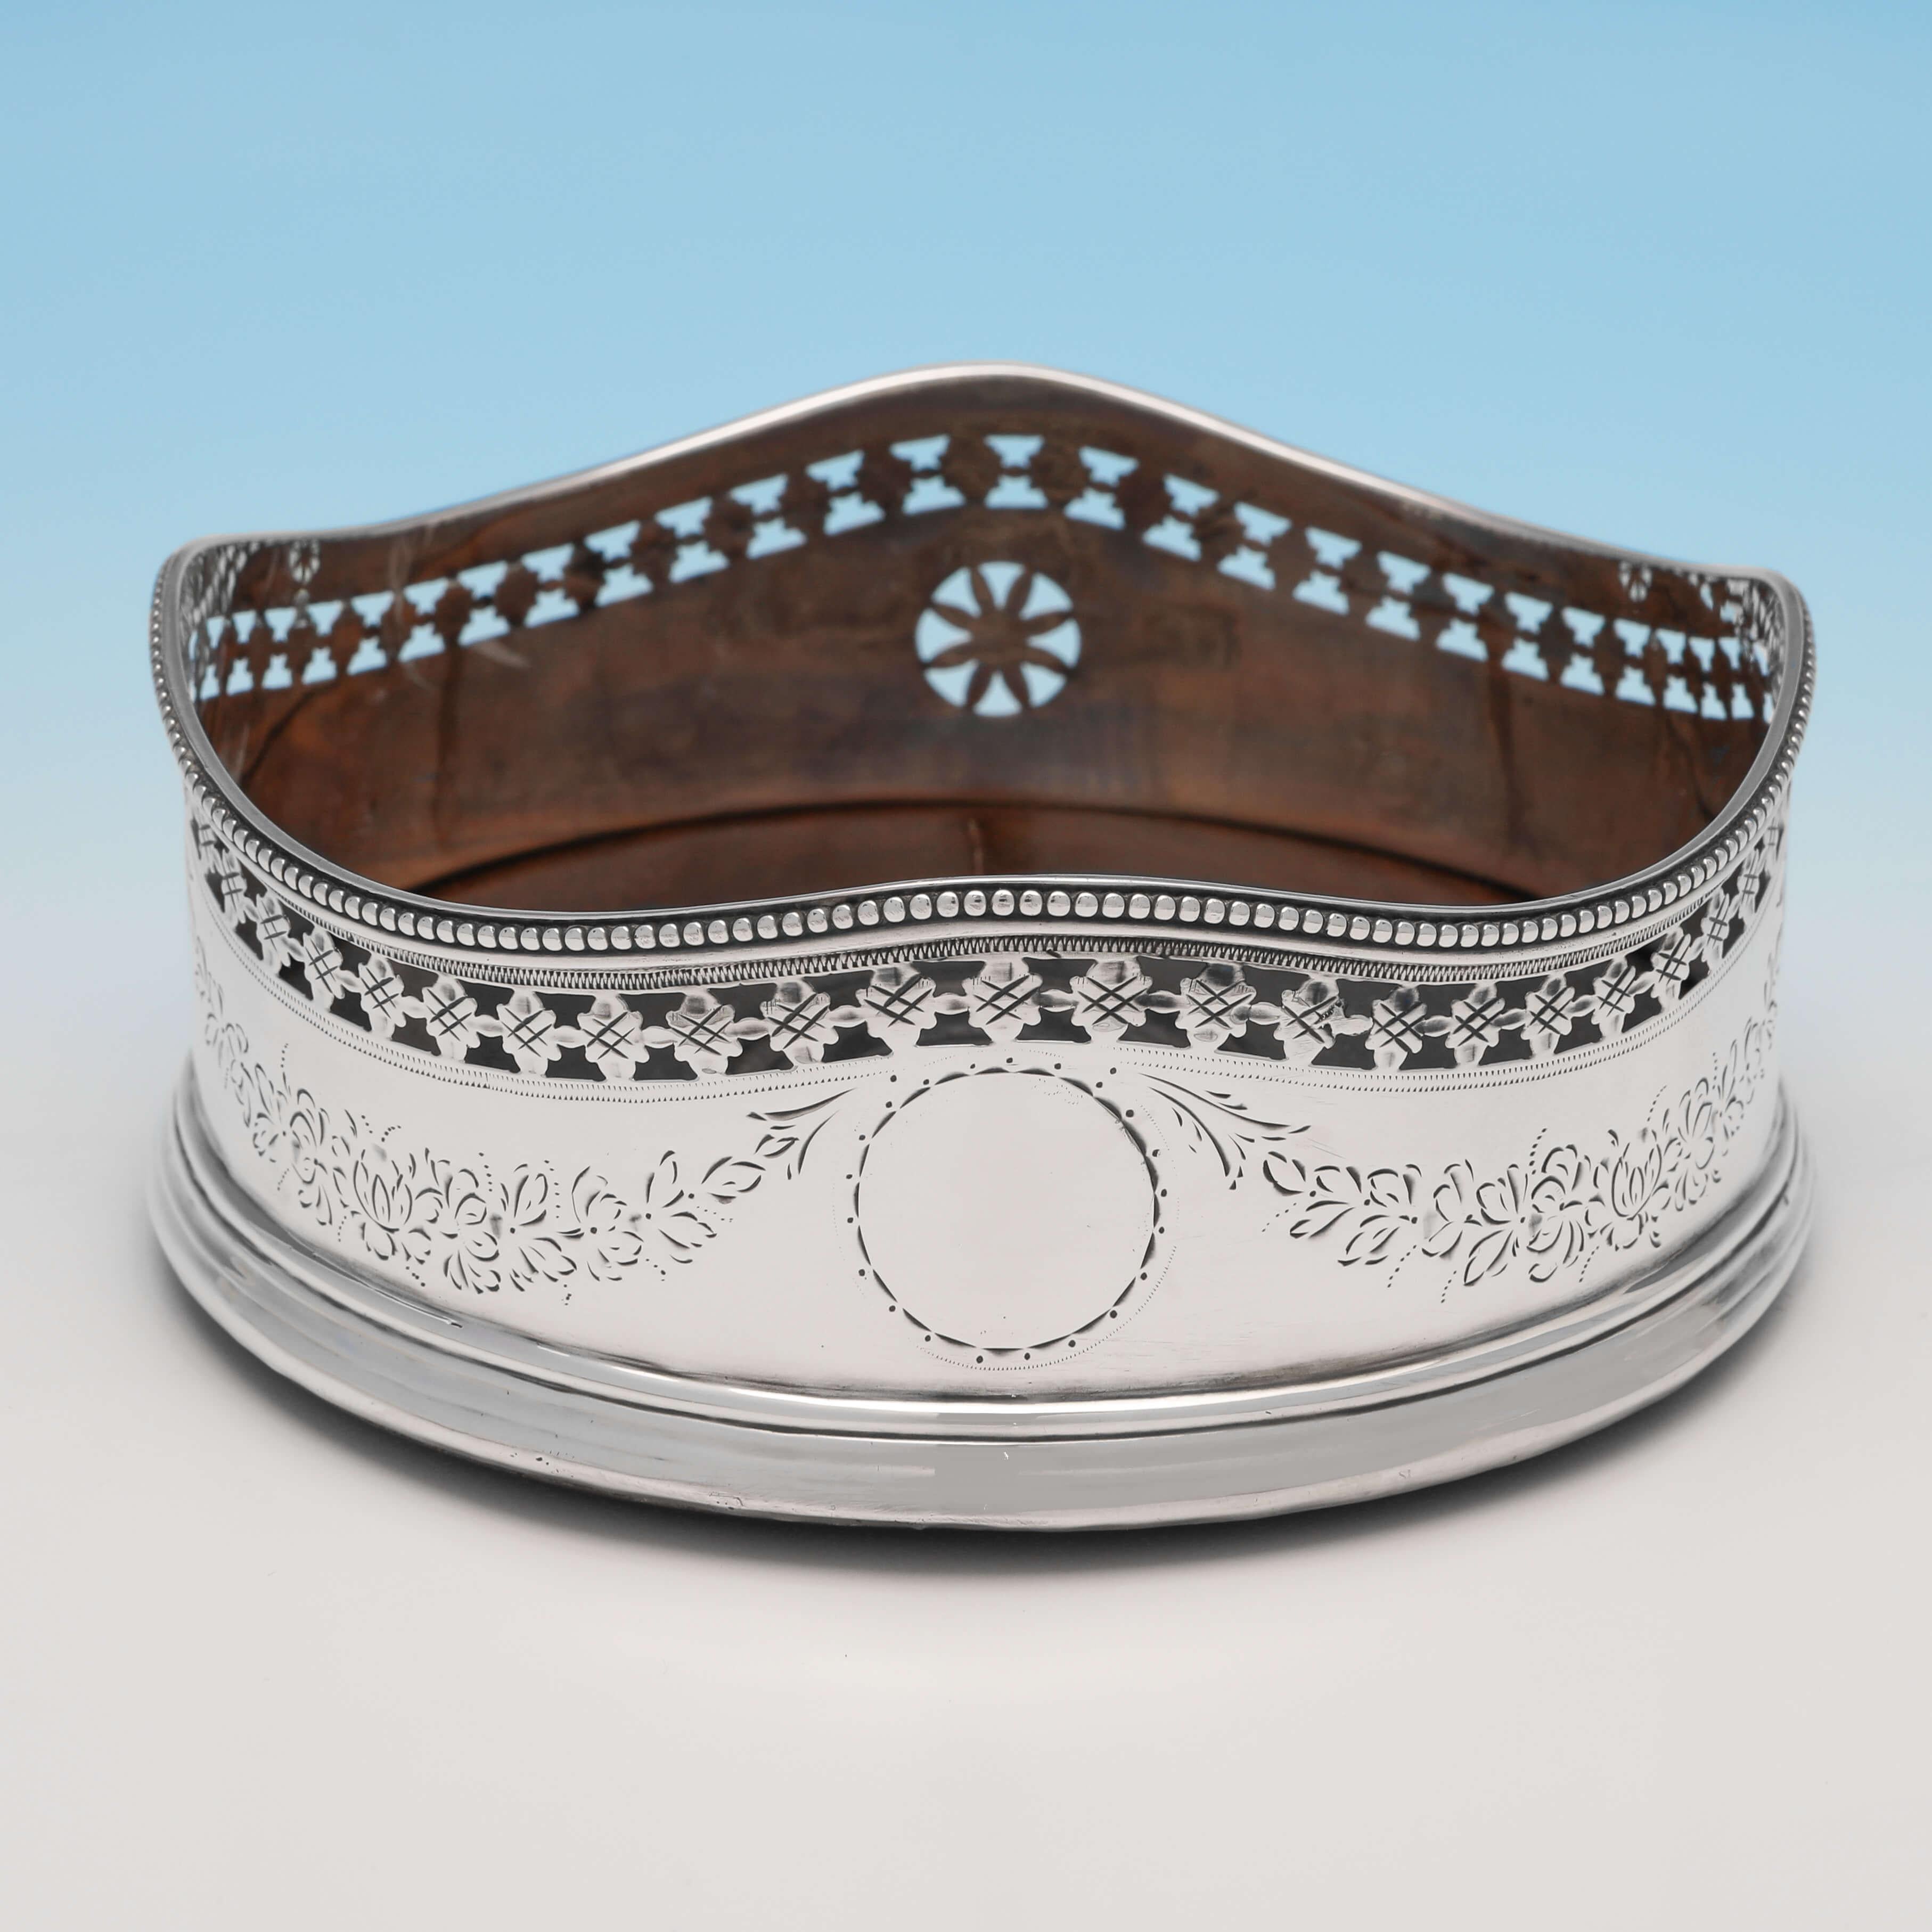 Hallmarked in London in 1787 by Hester Bateman, this very attractive pair of George III, antique sterling silver wine coasters, feature engraved and pierced decoration to the bodies, and shaped rims with bead borders. Each wine coaster measures